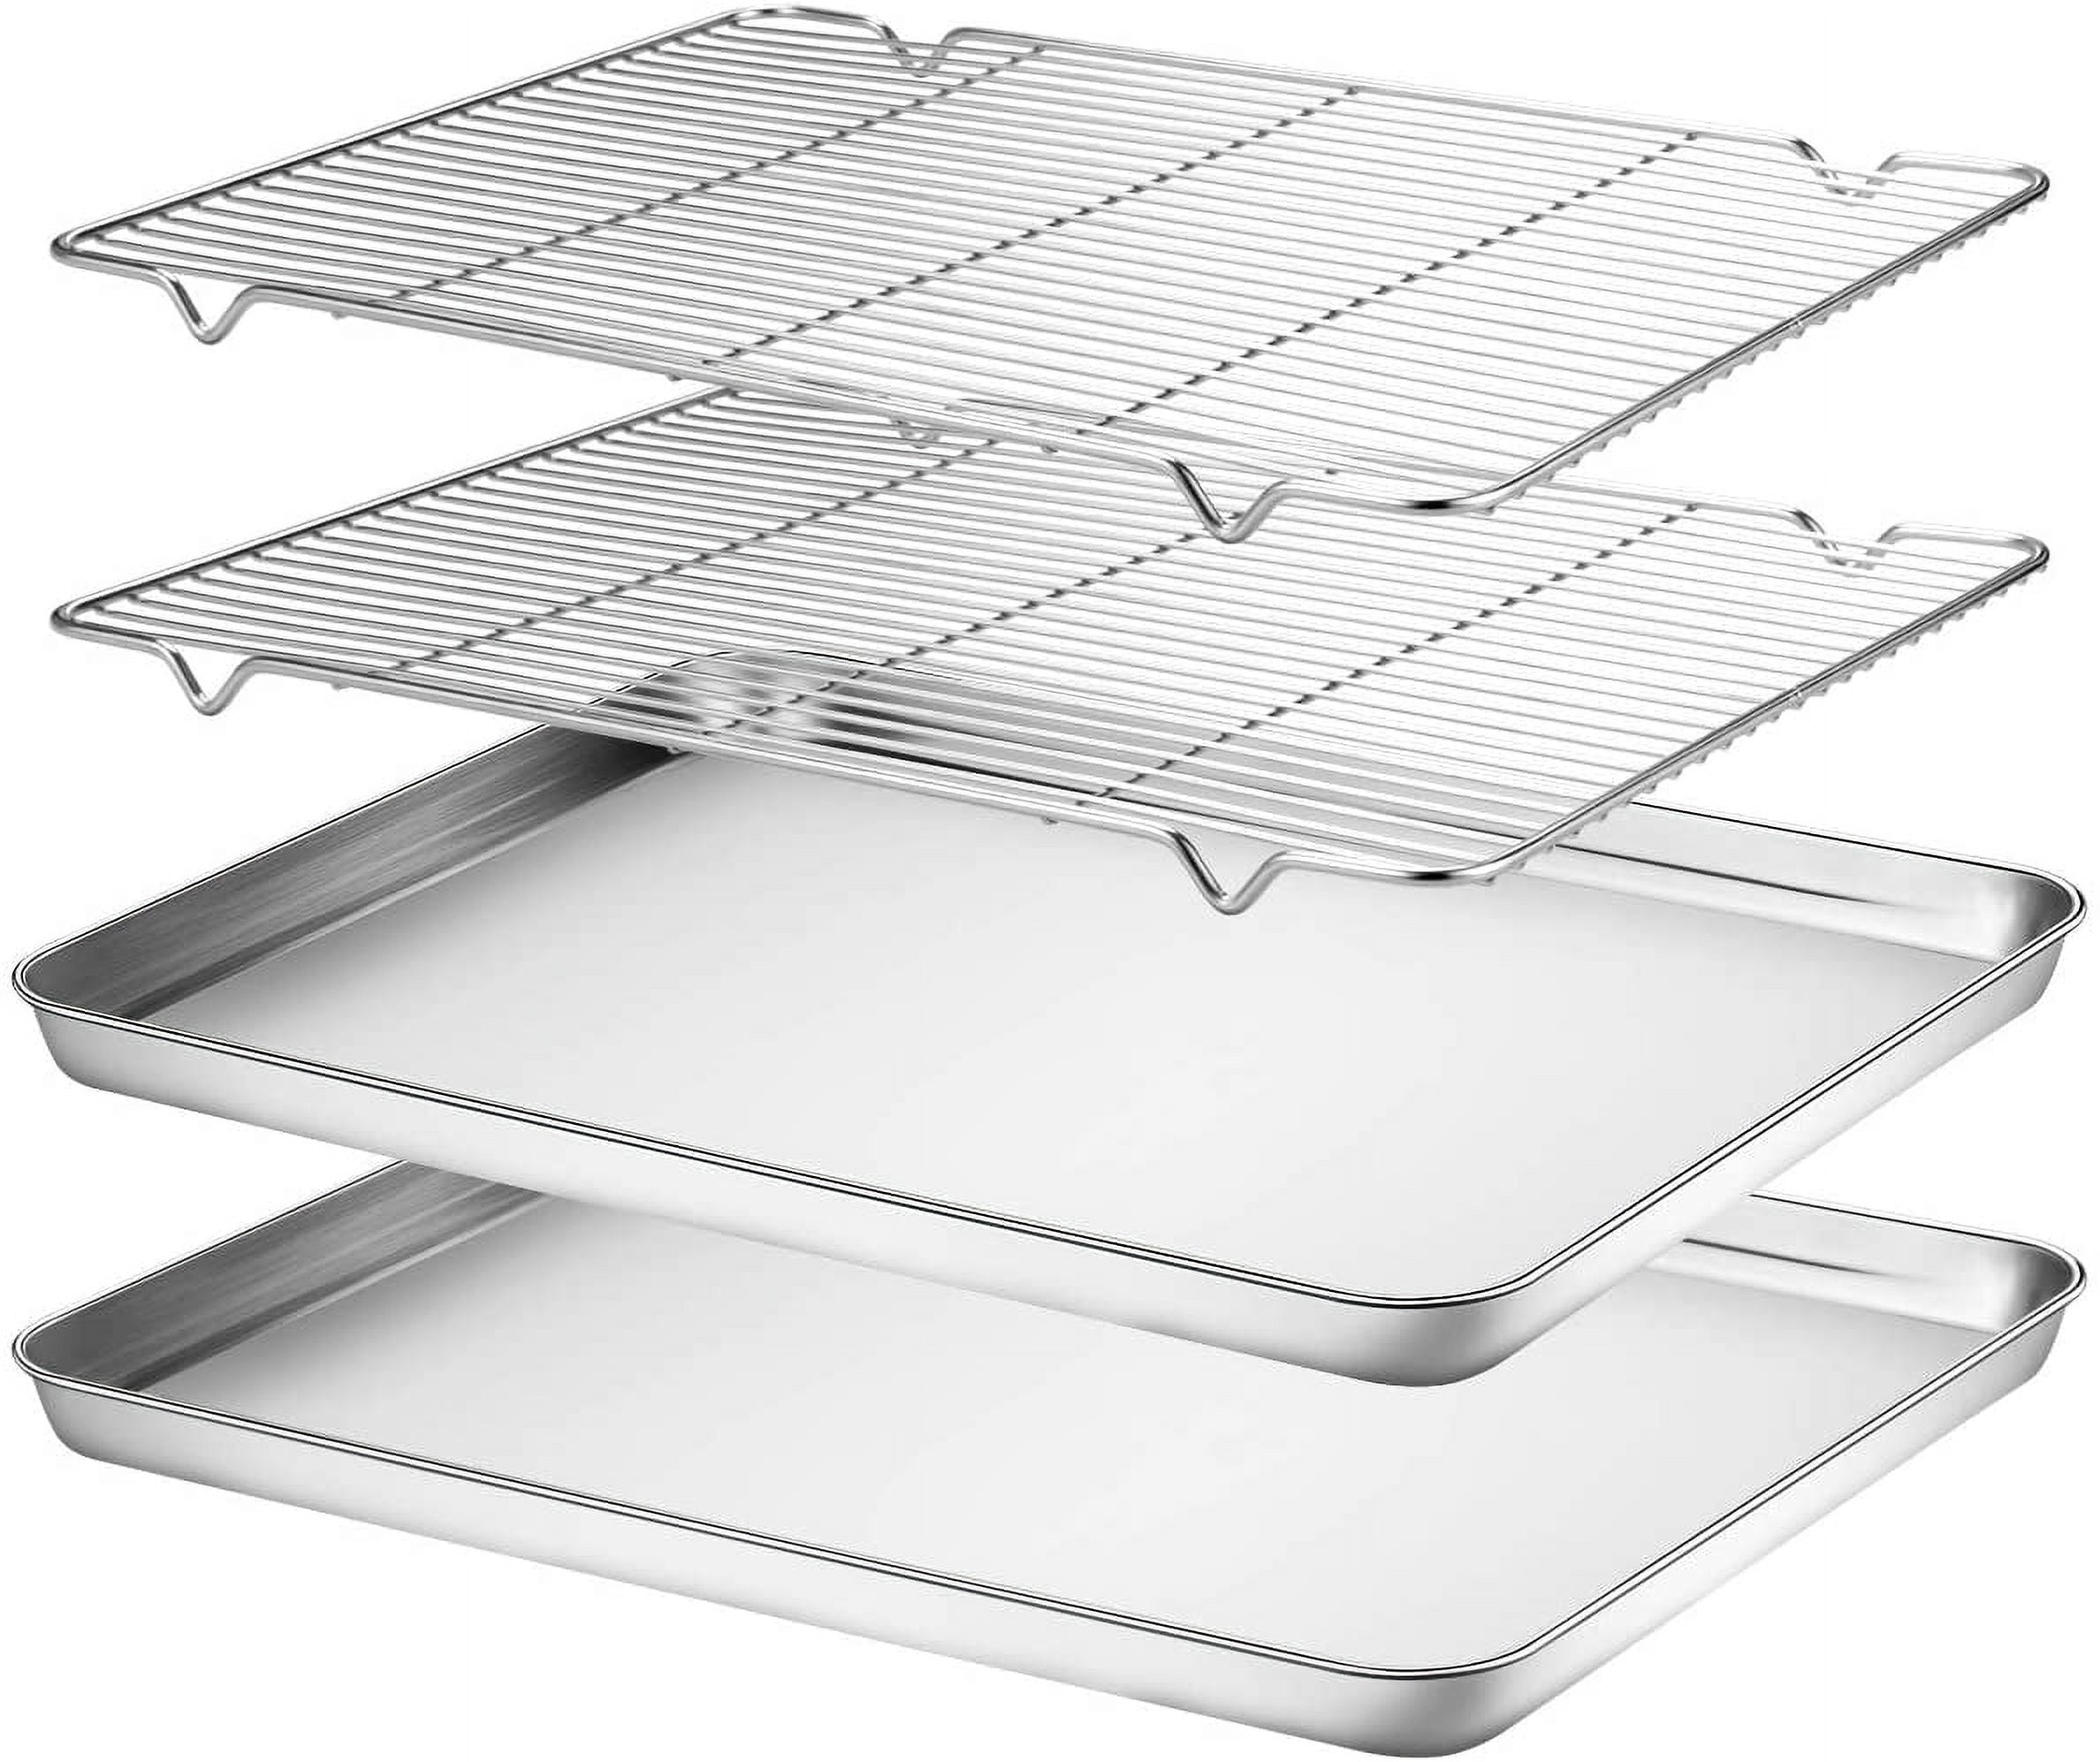 Wildone Baking Sheet with Silicone Mat Set, Stainless Steel Cookie Pan with  Baking Mat, Size 16 x 12 x 1 Inch, Set of 4-2 Sheets + 2 Mats